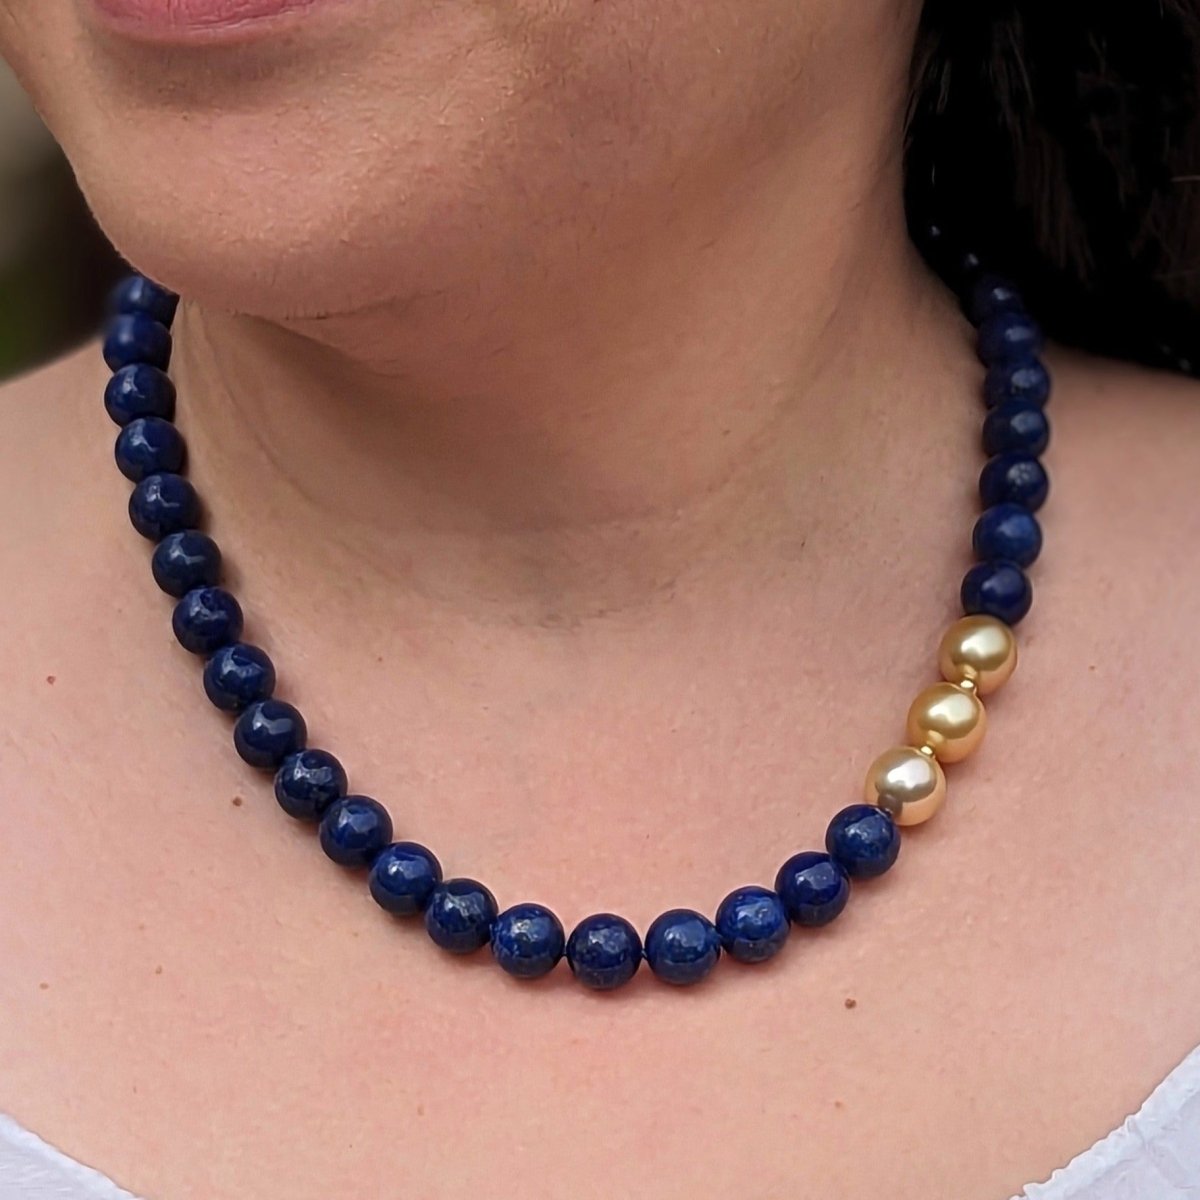 11-12mm Golden South Sea Pearl and Lapis Lazuli Necklace - Marina Korneev Fine Pearls